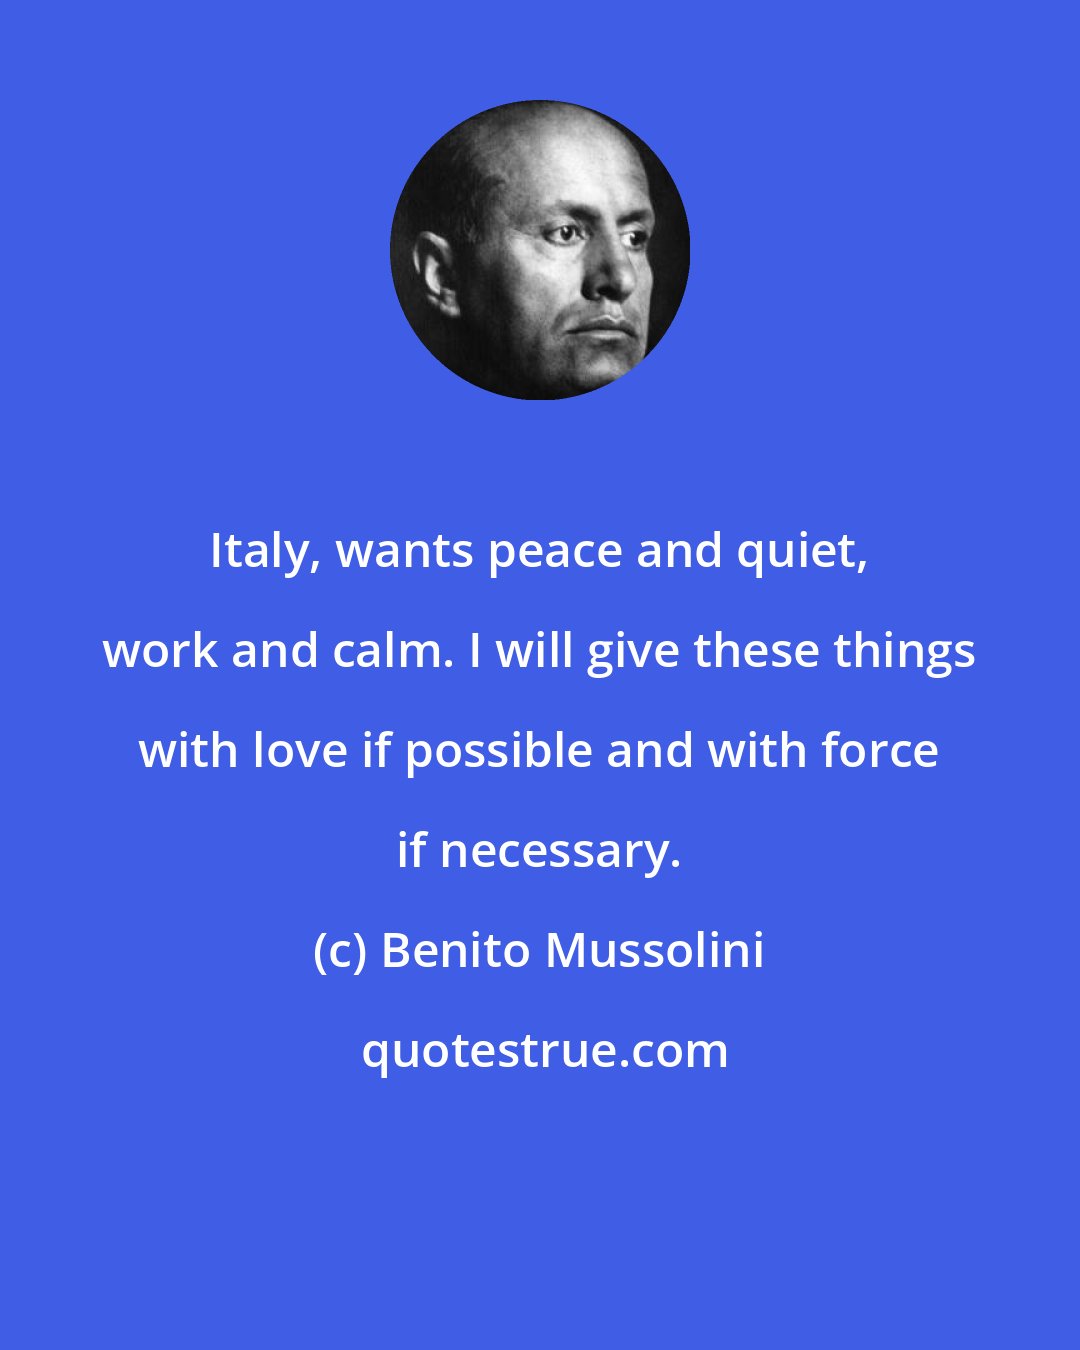 Benito Mussolini: Italy, wants peace and quiet, work and calm. I will give these things with love if possible and with force if necessary.